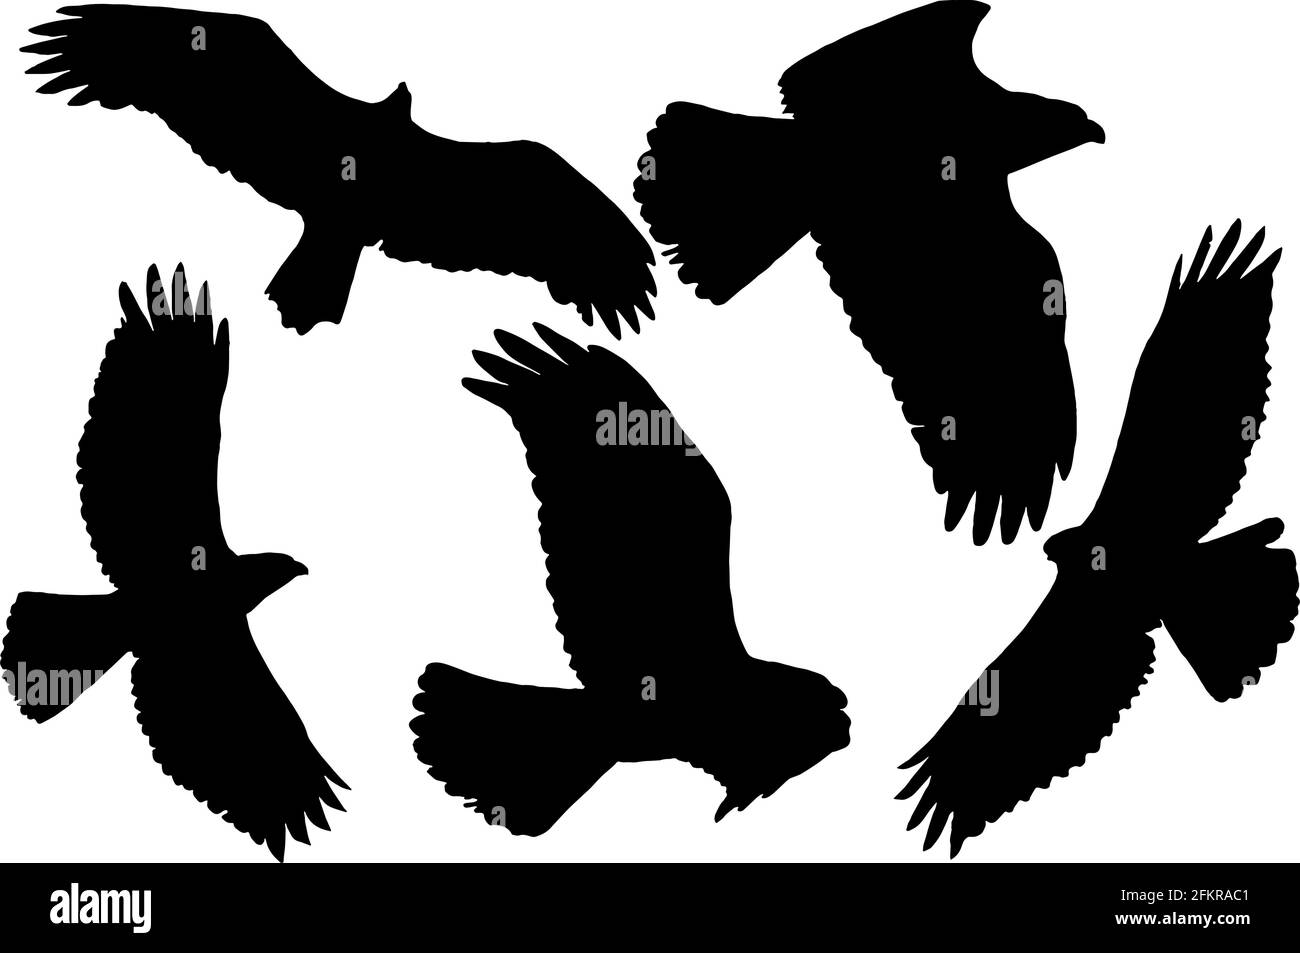 Birds of prey silhouettes in black on white background Stock Vector